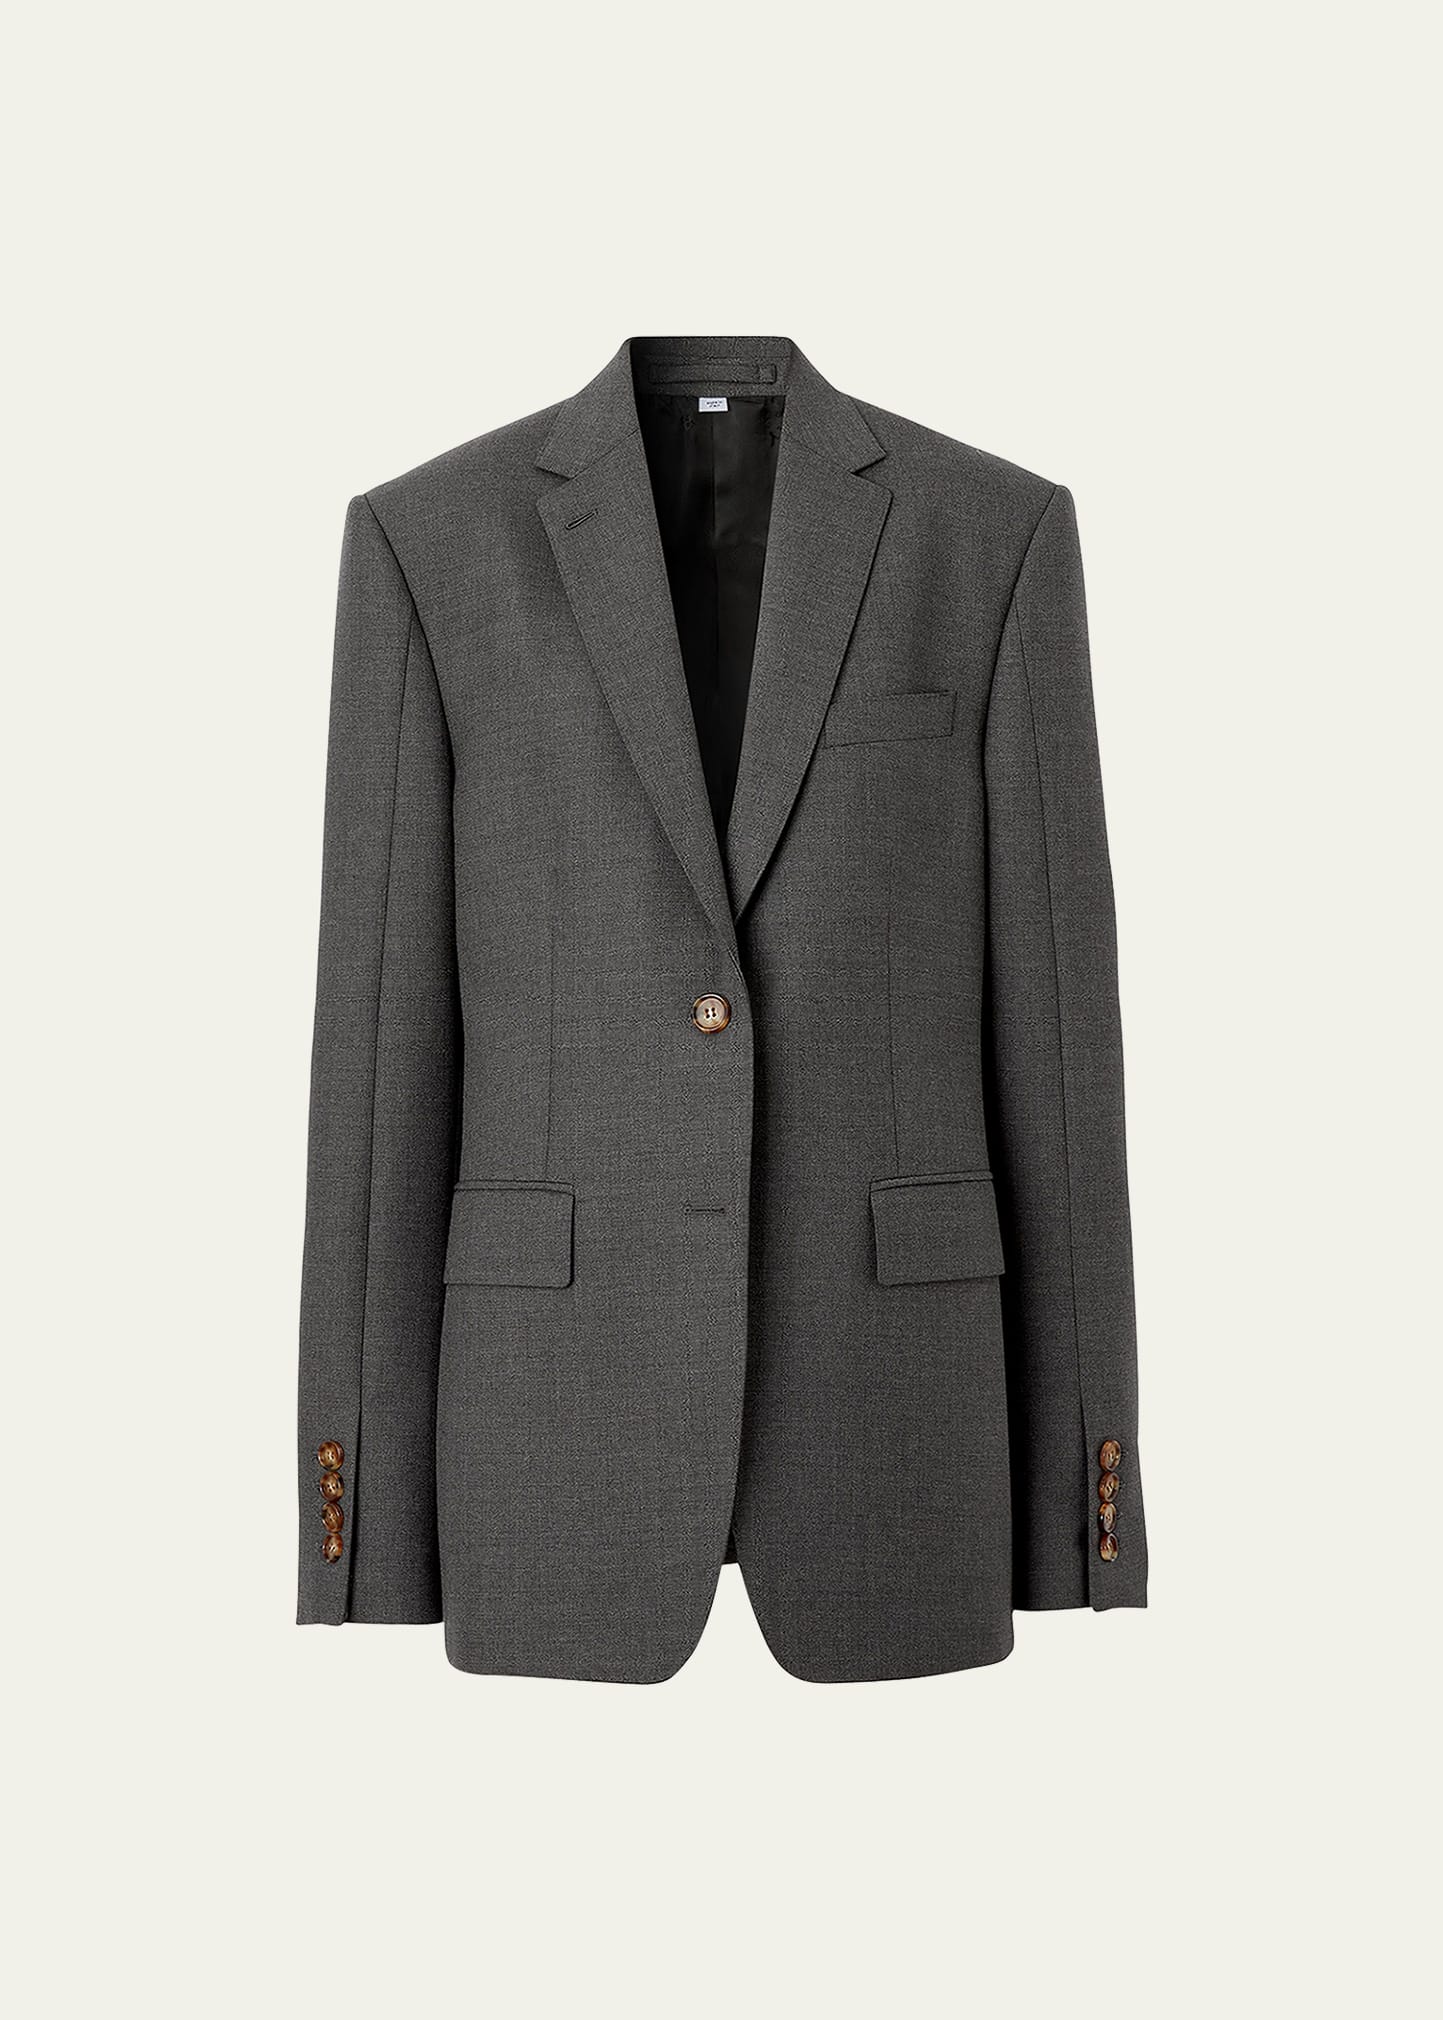 Burberry Loulou Wool Single-Breasted Blazer